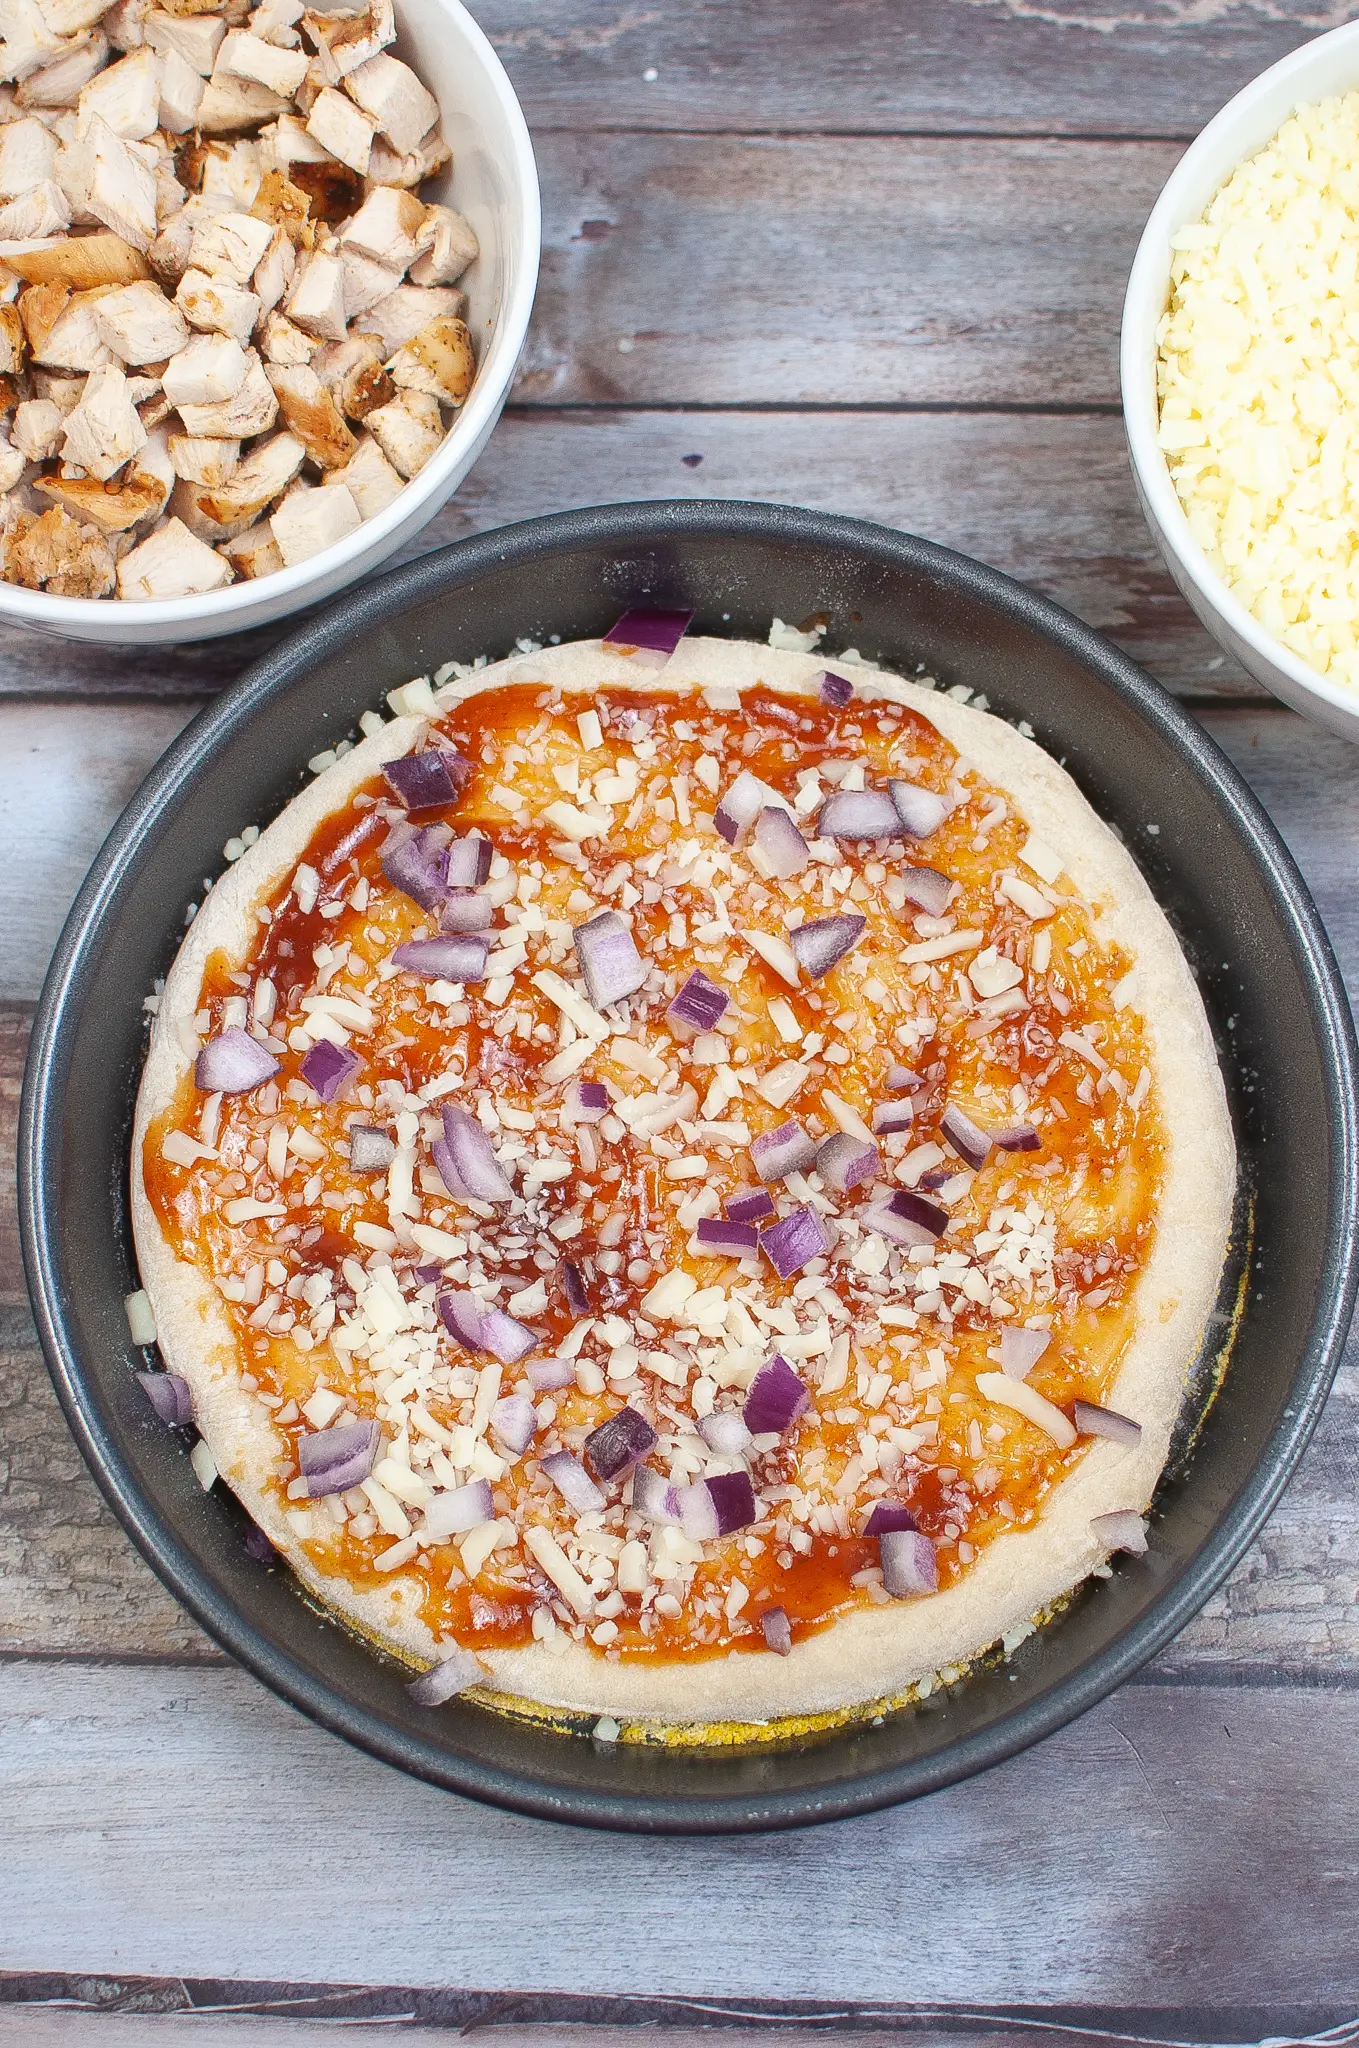 Pizza dough with bbq sauce, cheese and onion.